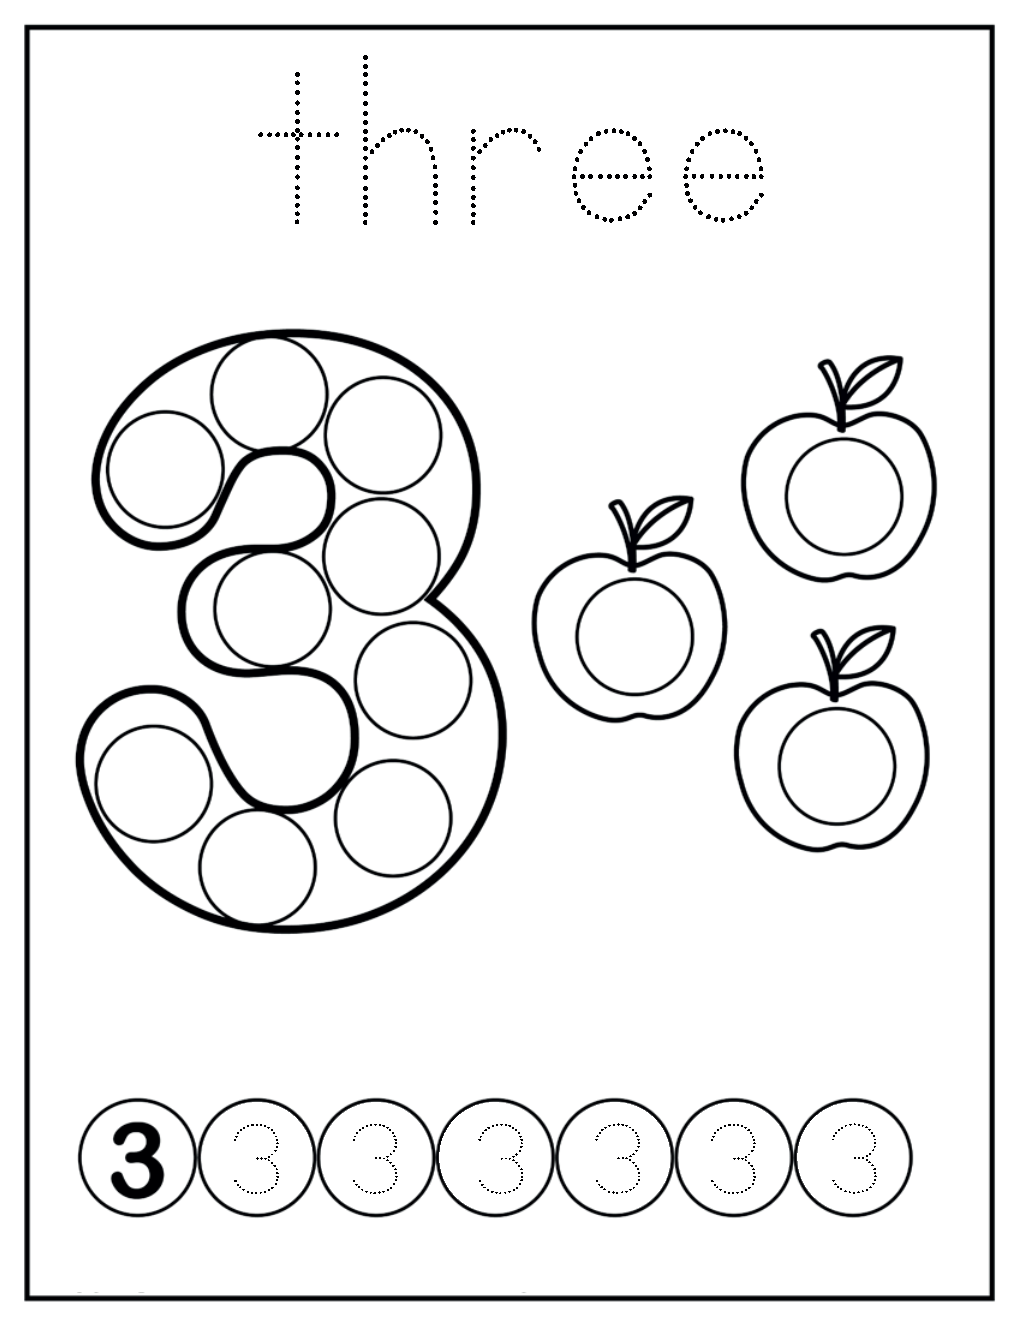 free english worksheets and printables for kindergarten